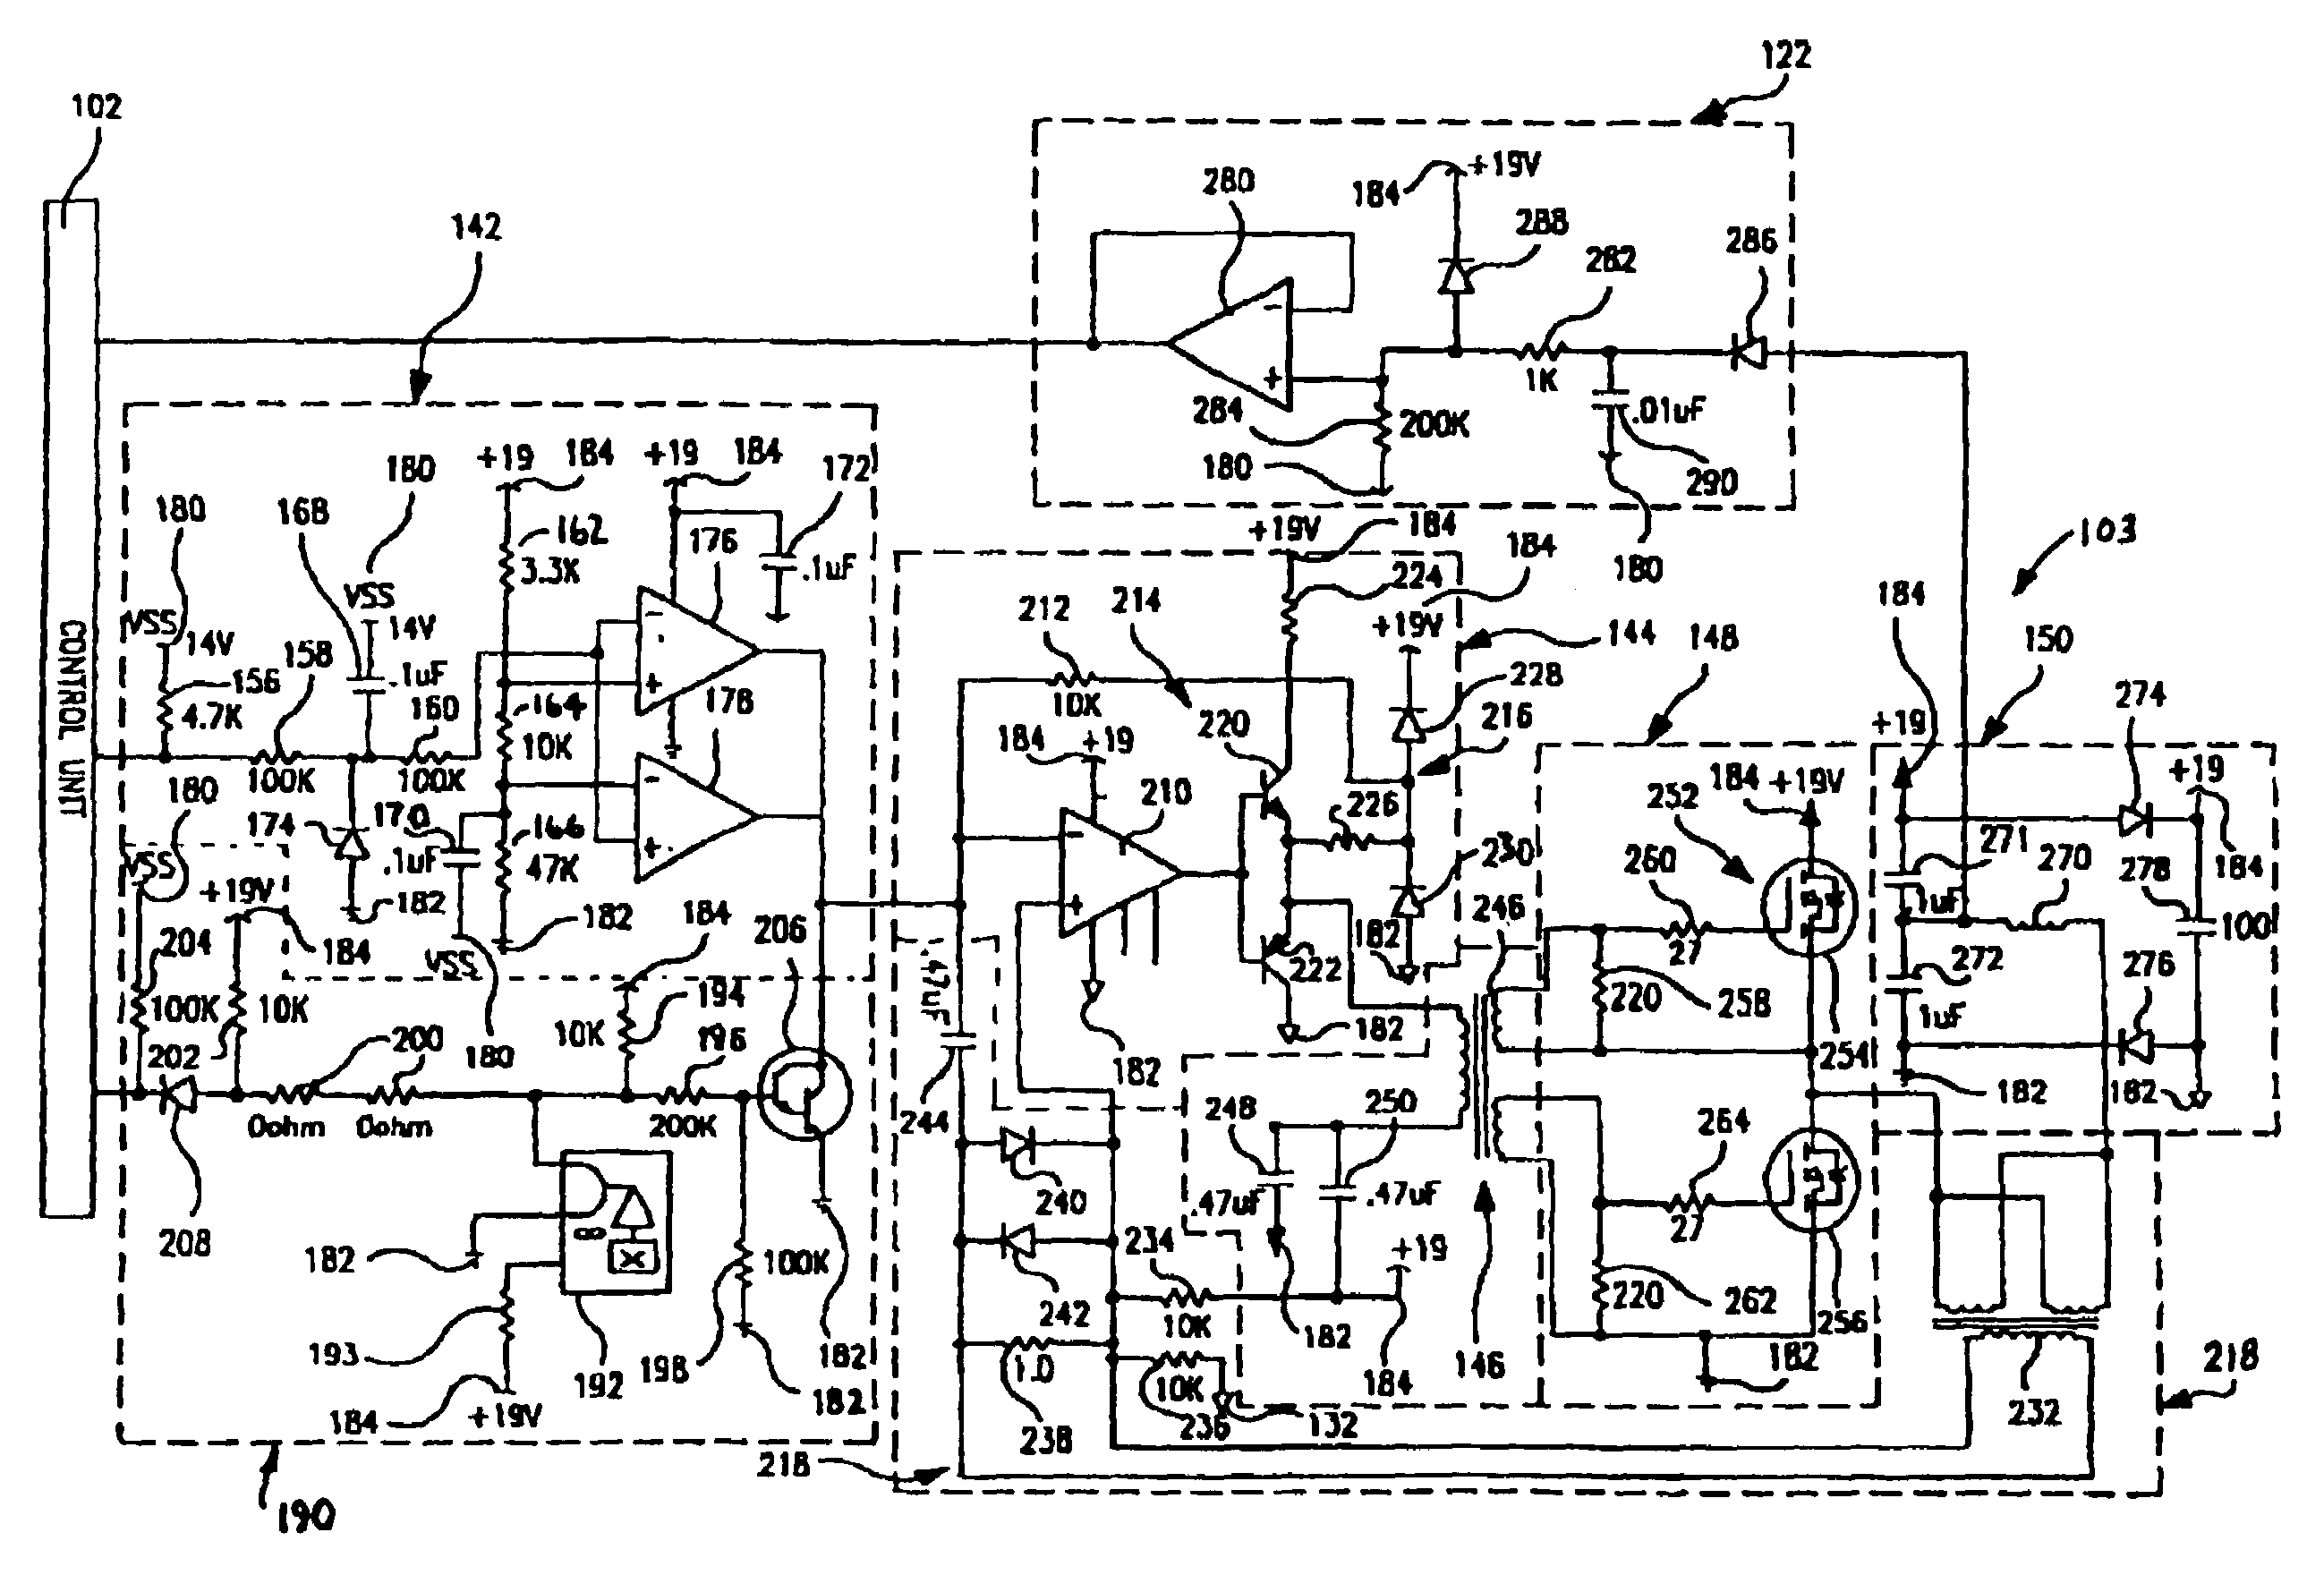 Inductively coupled ballast circuit